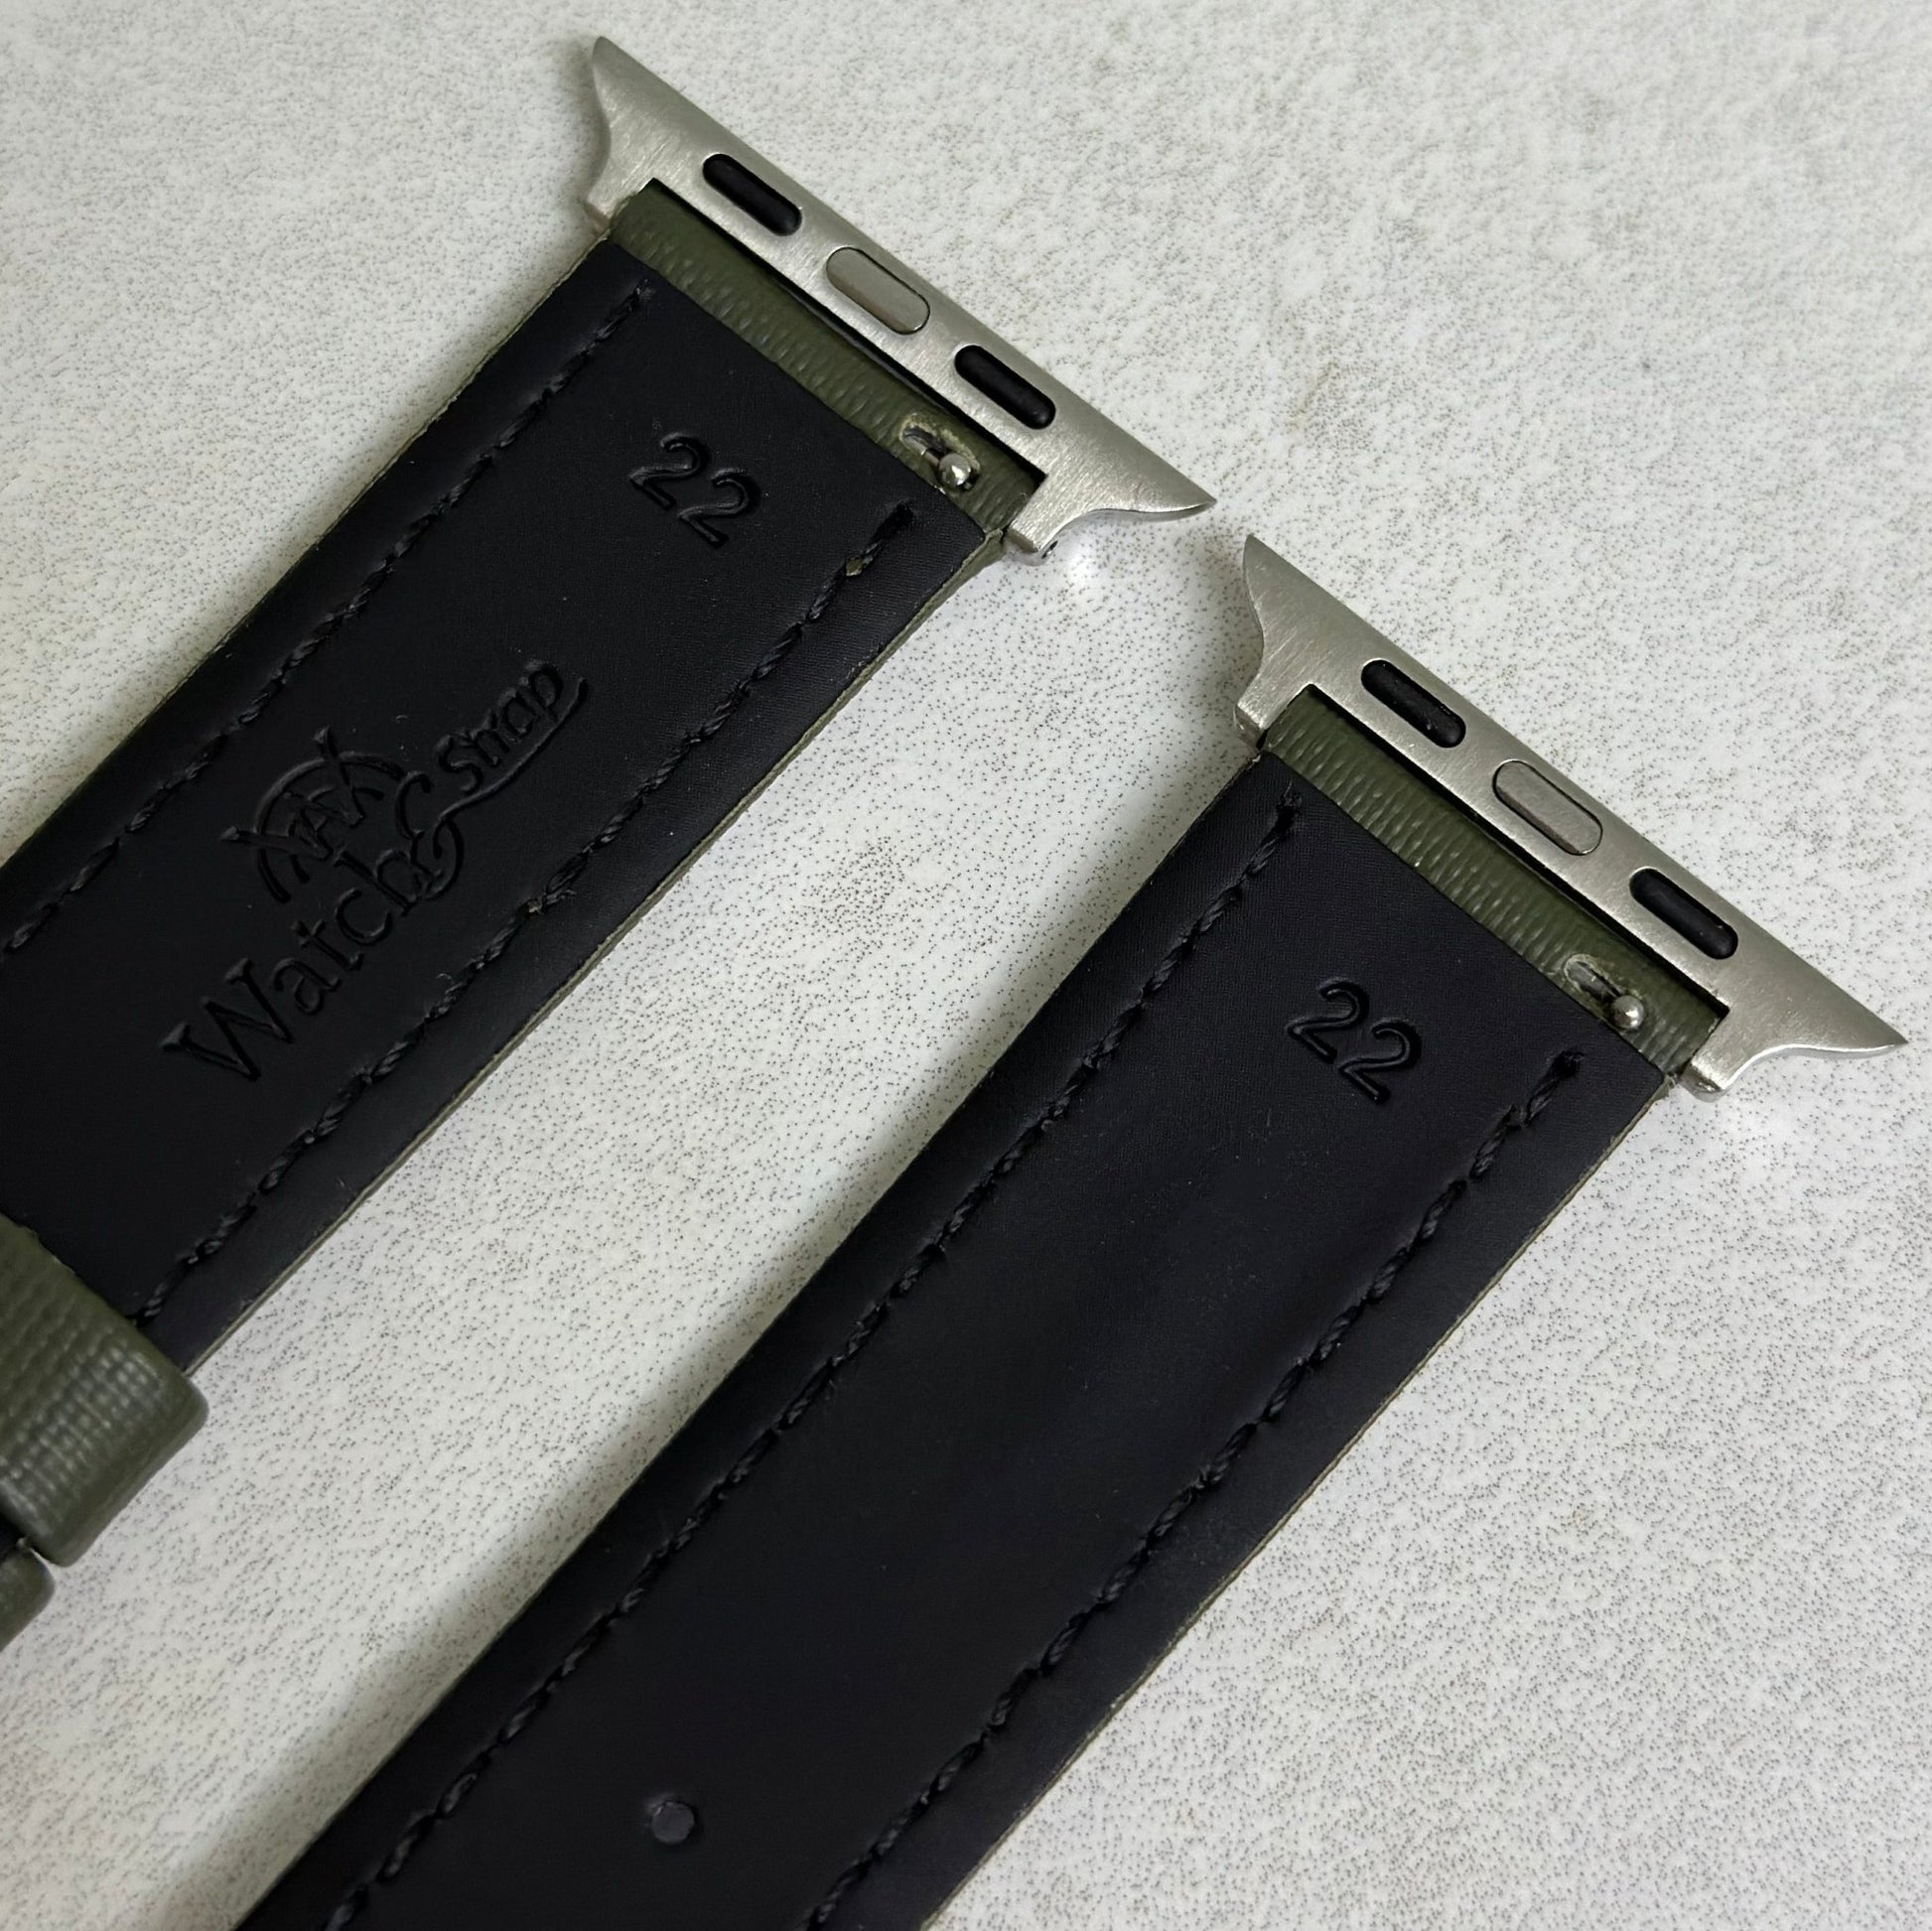 Rear of the Bermuda khaki green Apple Watch strap. Black leather. Watch And Strap